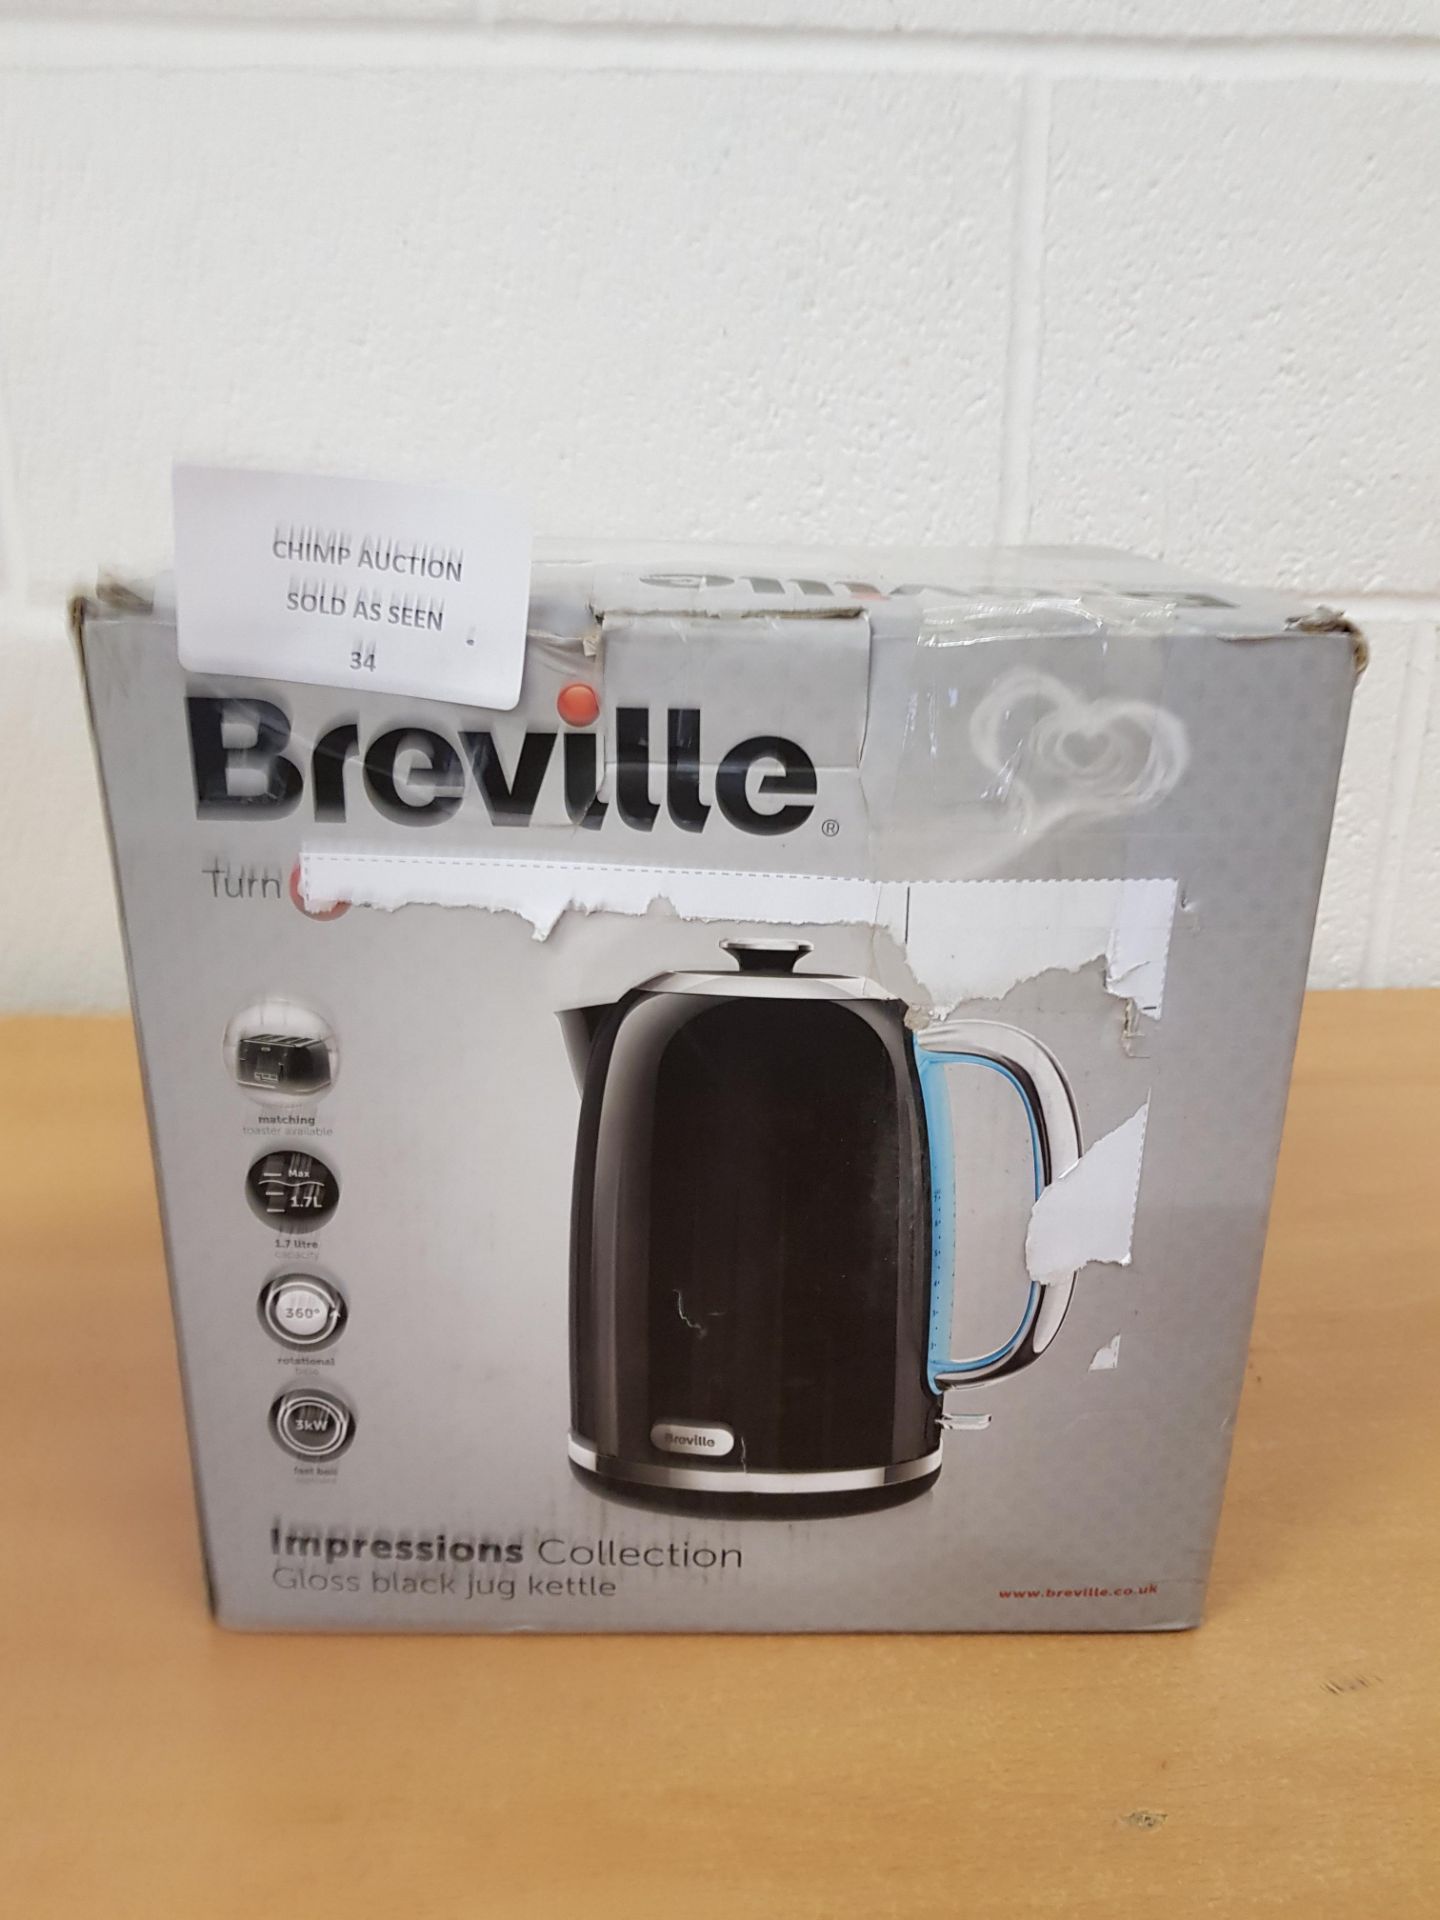 Breville Impressions Collections jug kettle